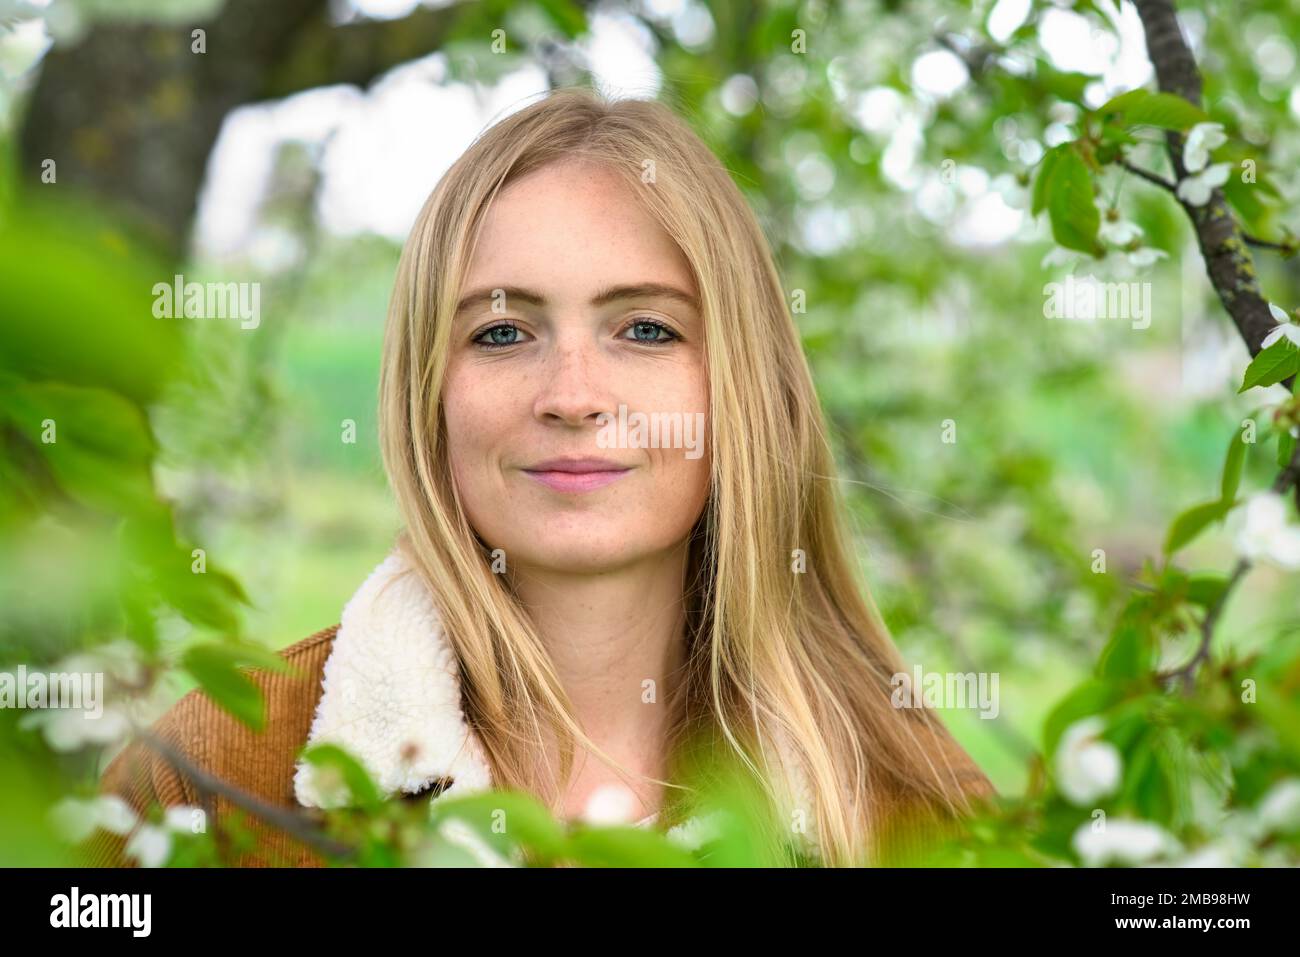 Portrait of a beautiful young smiling woman in nature, with spring blossoms and tender green foliage on tree branches surrounding her face Stock Photo